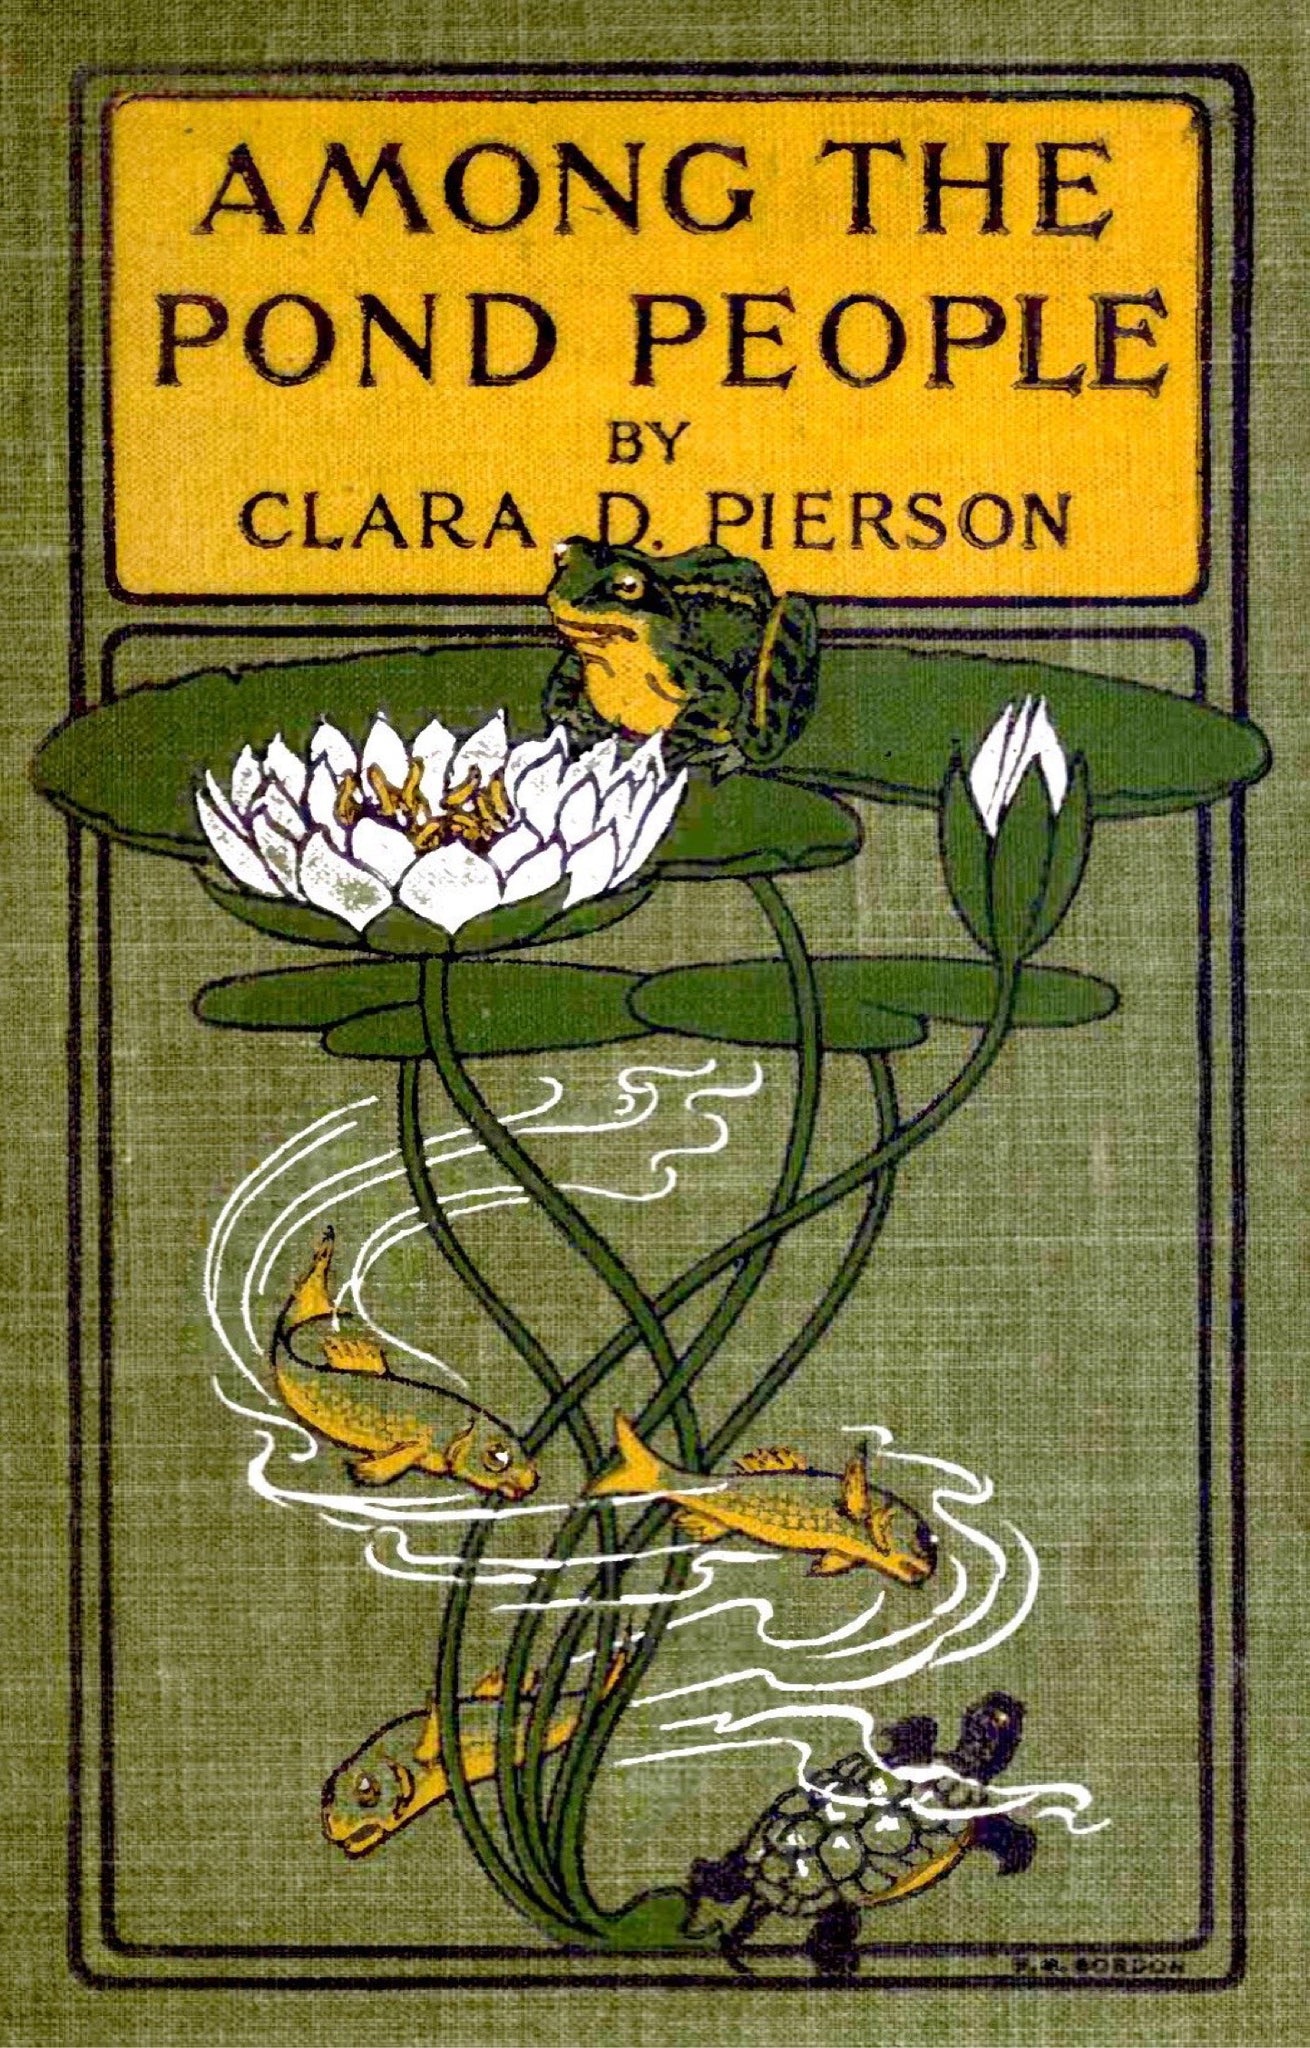 Among the Pond People by Clara Dillingham Peirson, 1901